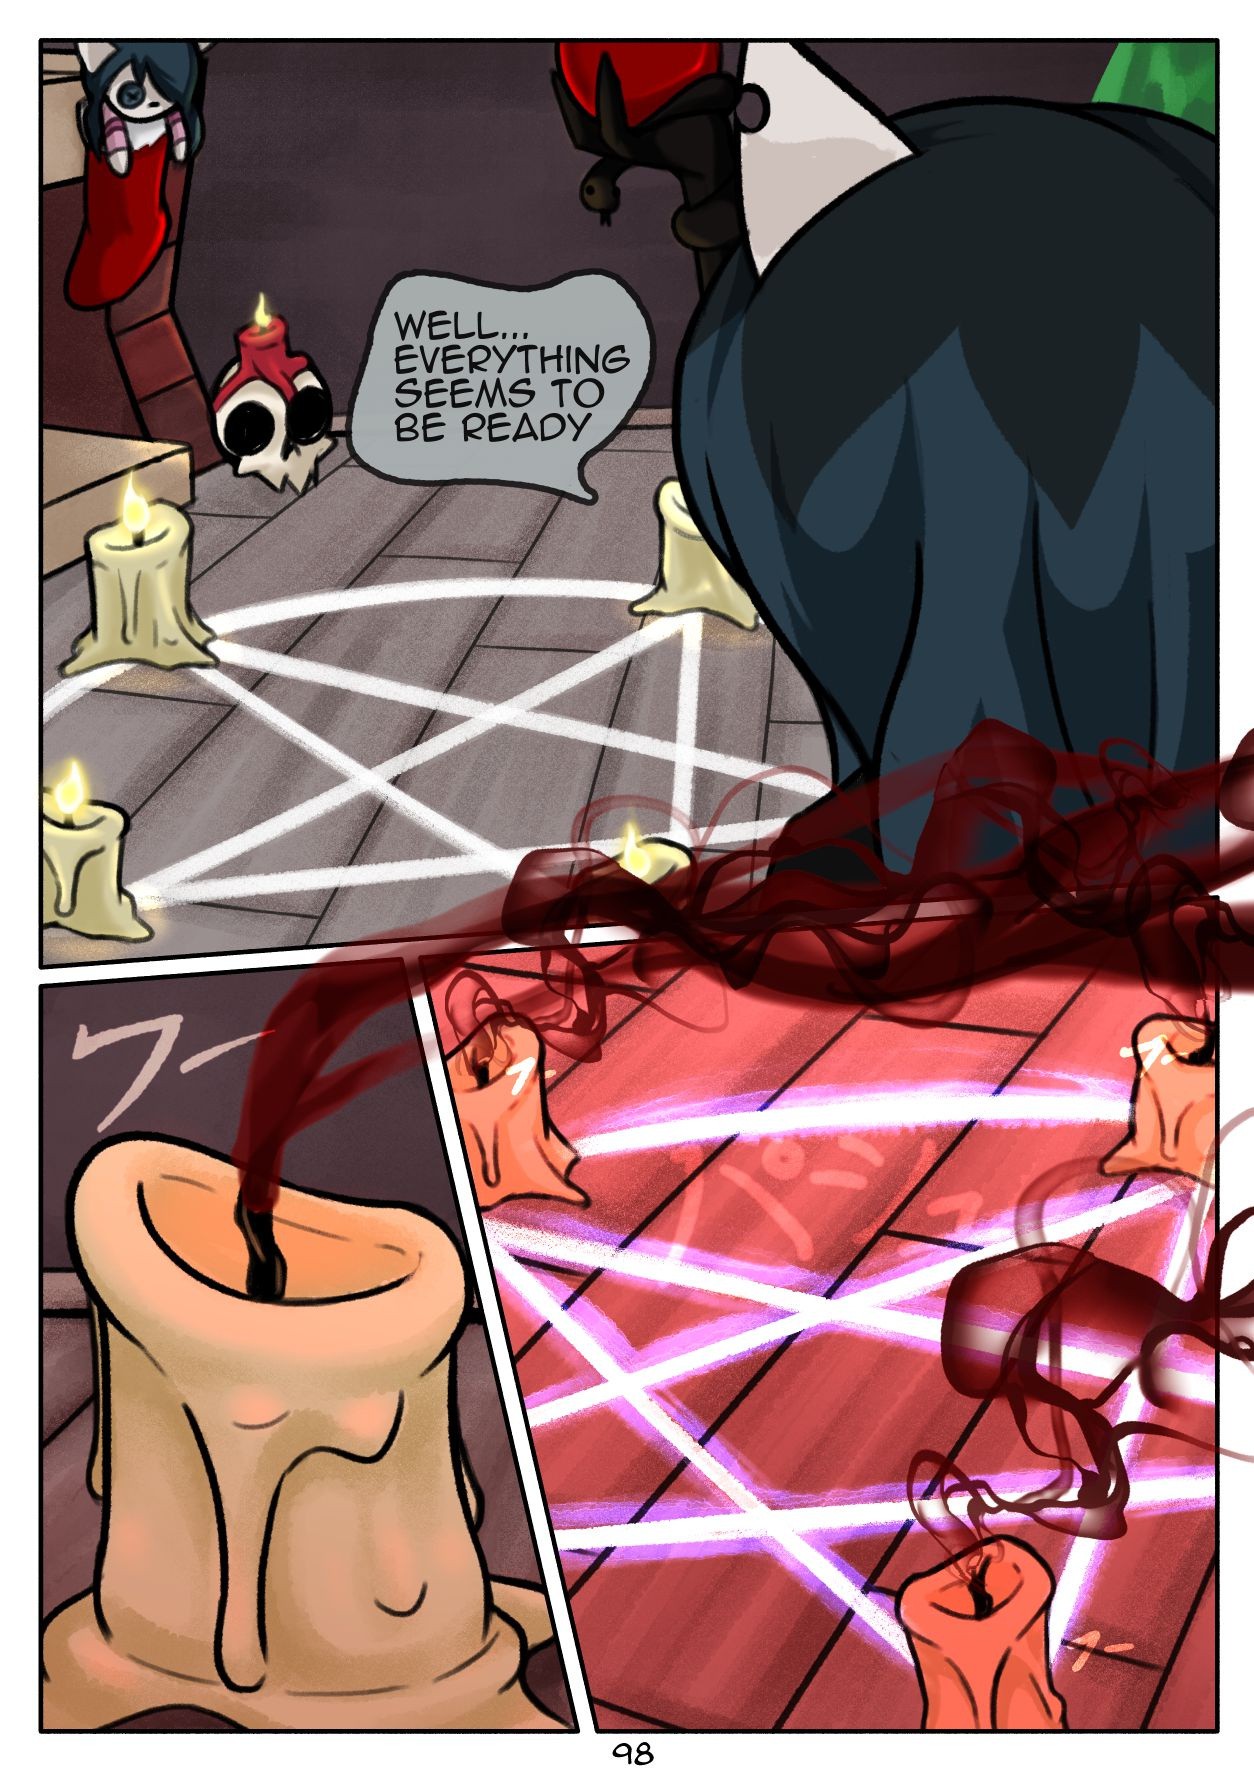 The Offering - N3f porn comic picture 3